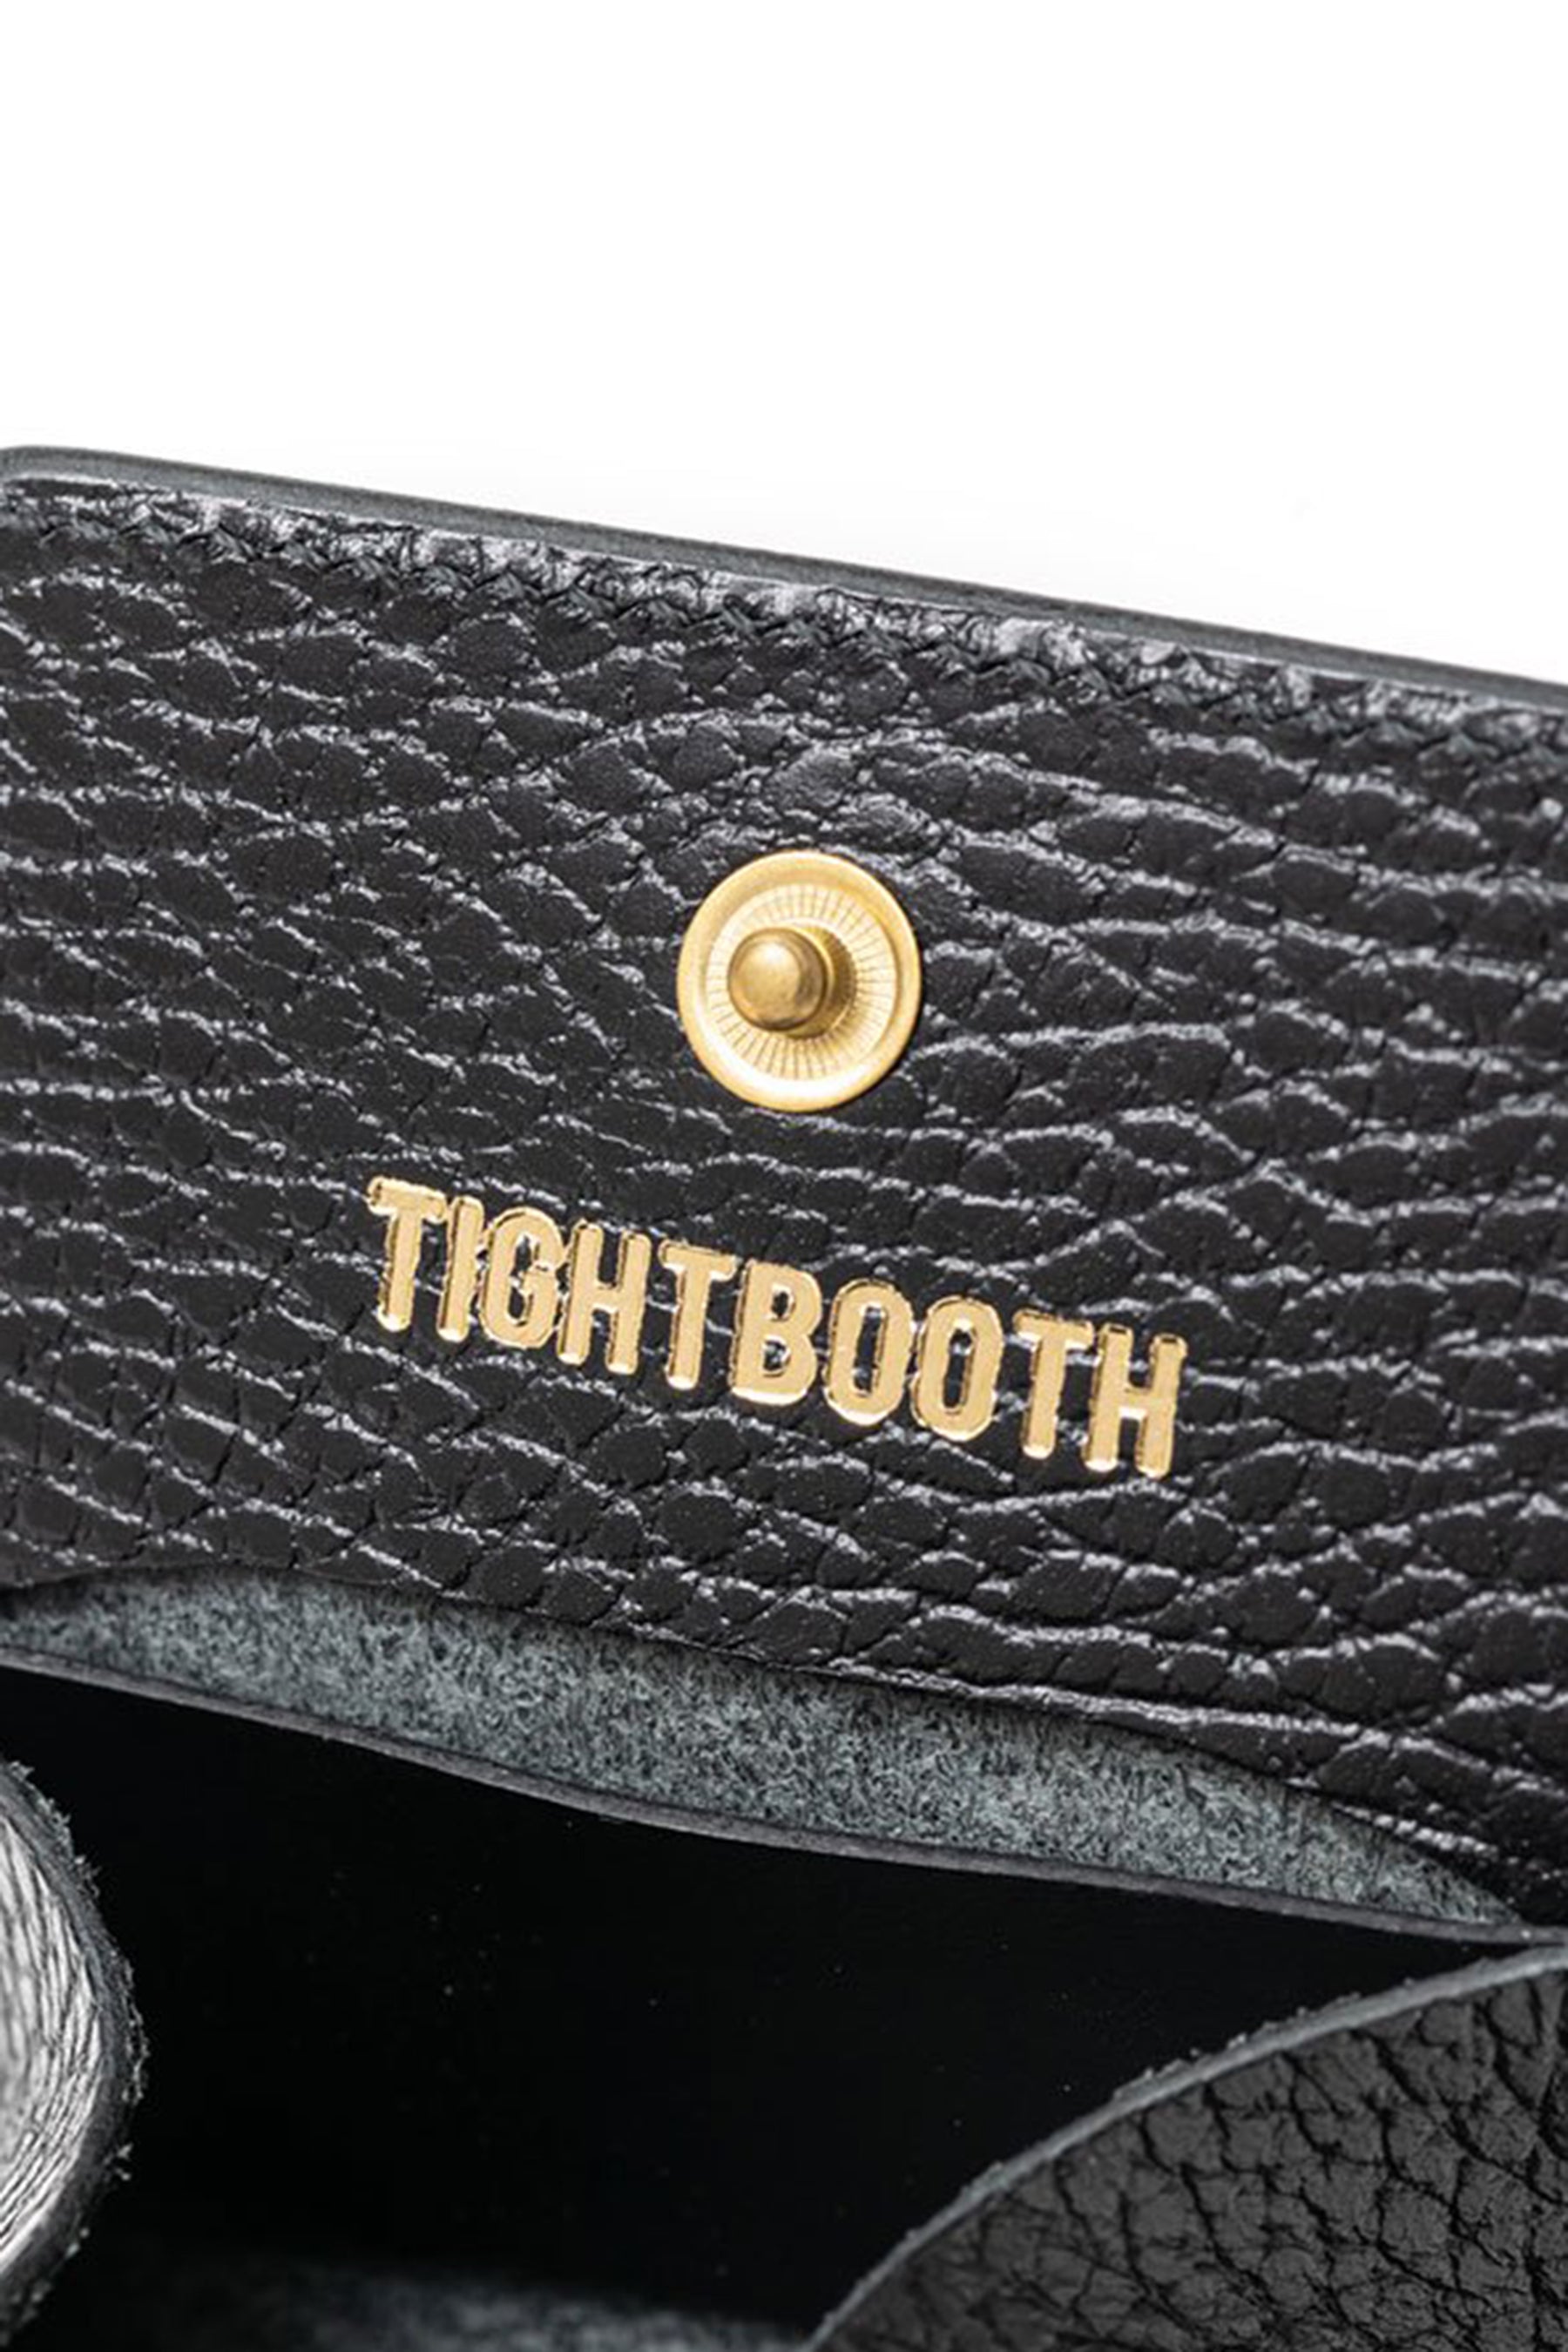 TIGHTBOOTH SS23 LEATHER COIN CASE / BLK - NUBIAN